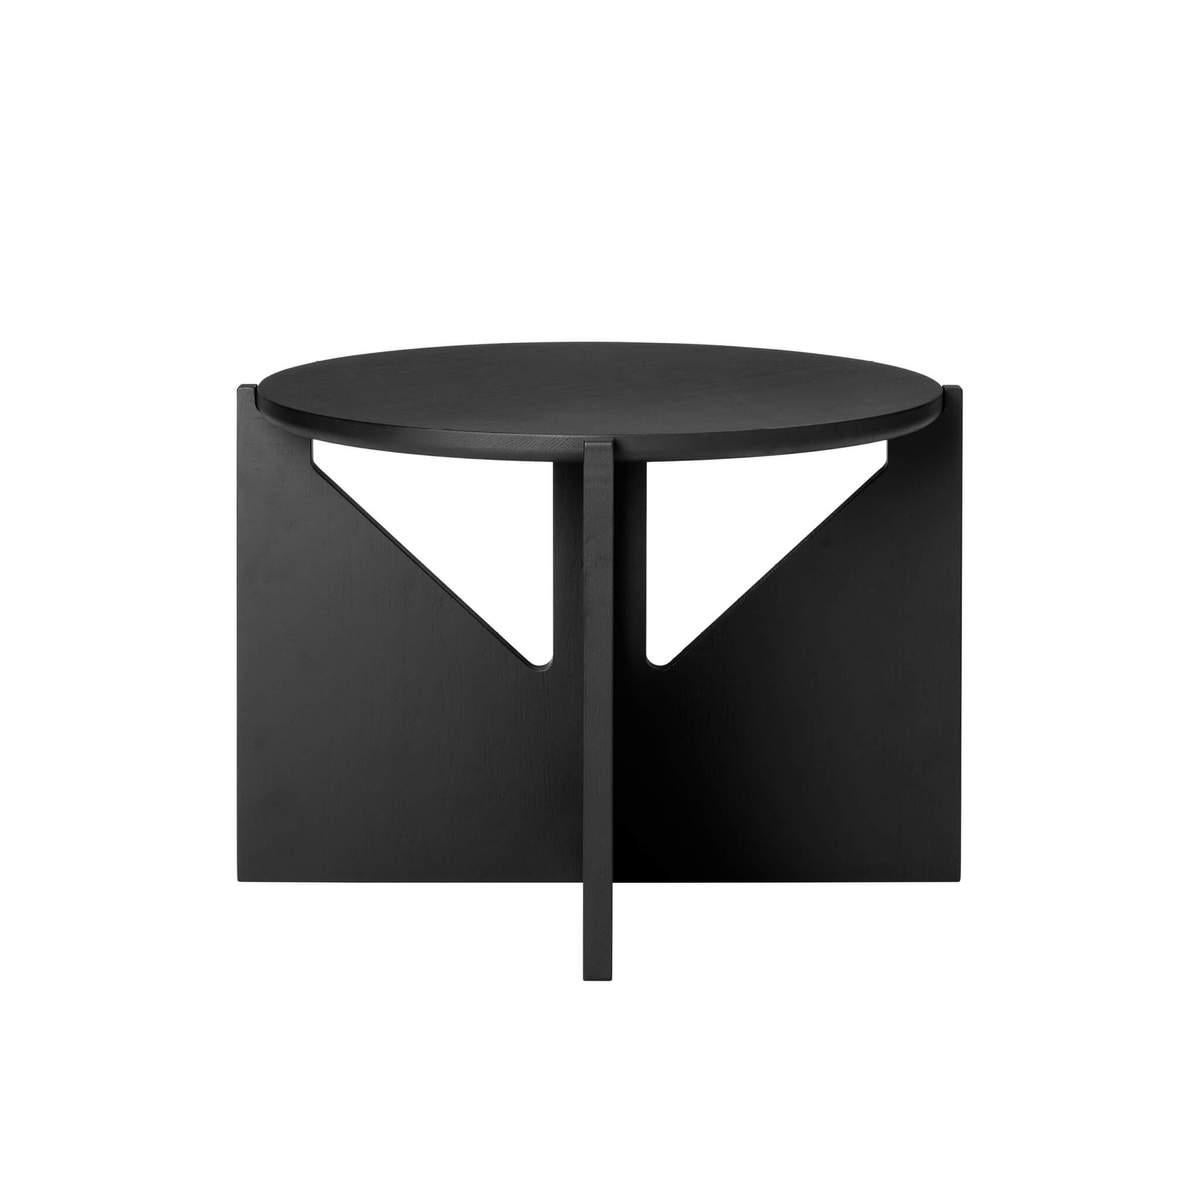 Black table by Kristina Dam Studio.
Materials: Solid oak with black lacquer. 
Also available in other colors and sizes. 
Dimensions: 52 x 52 x H 36cm.

The table is a classic coffee table from Kristina Dam Design Studio. The table is based on